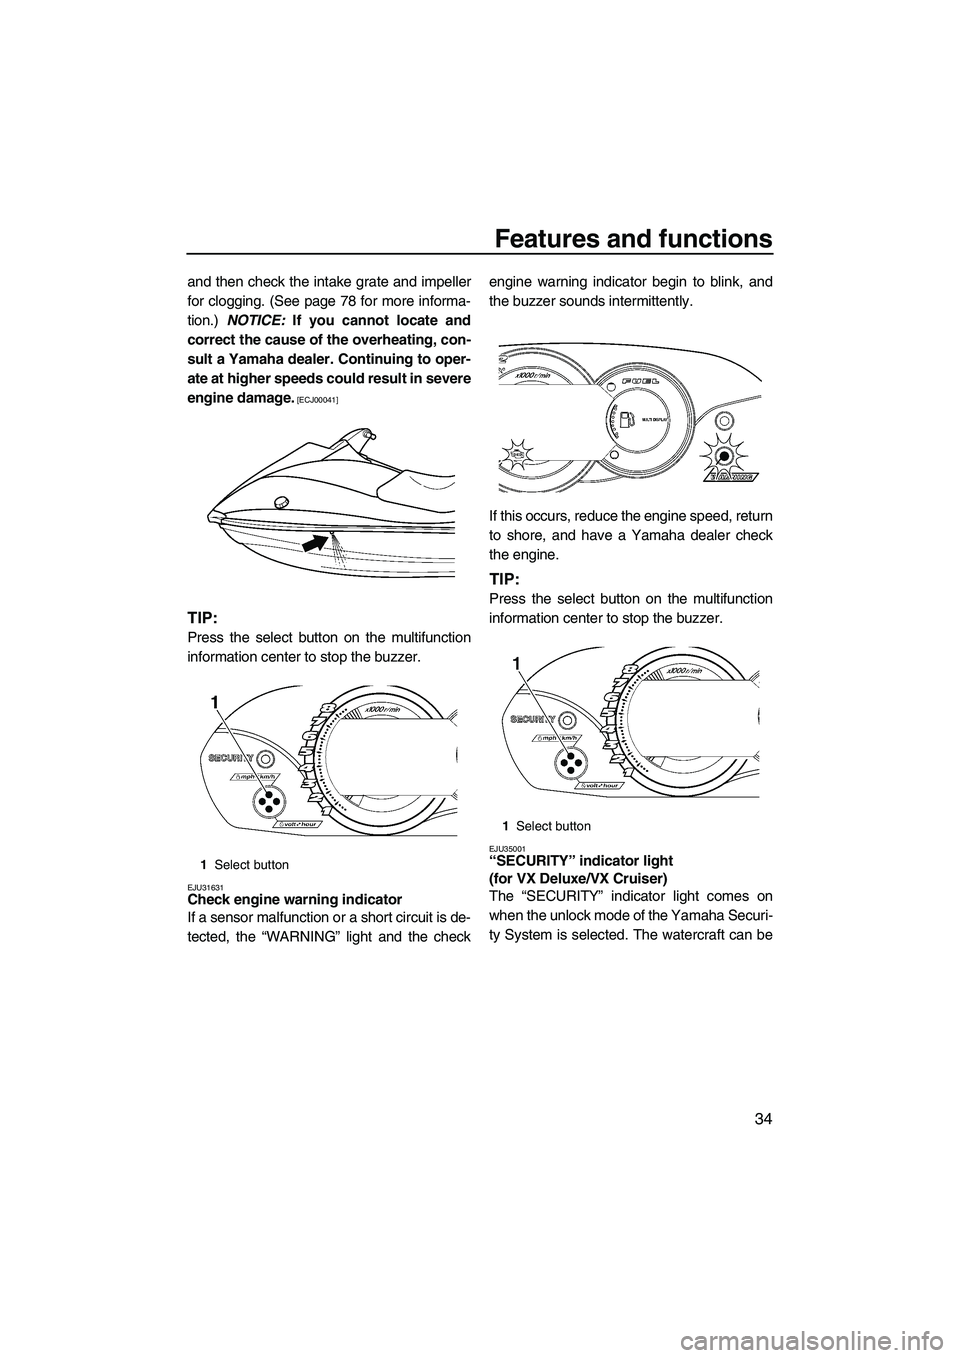 YAMAHA VX 2009  Owners Manual Features and functions
34
and then check the intake grate and impeller
for clogging. (See page 78 for more informa-
tion.) NOTICE: If you cannot locate and
correct the cause of the overheating, con-
s